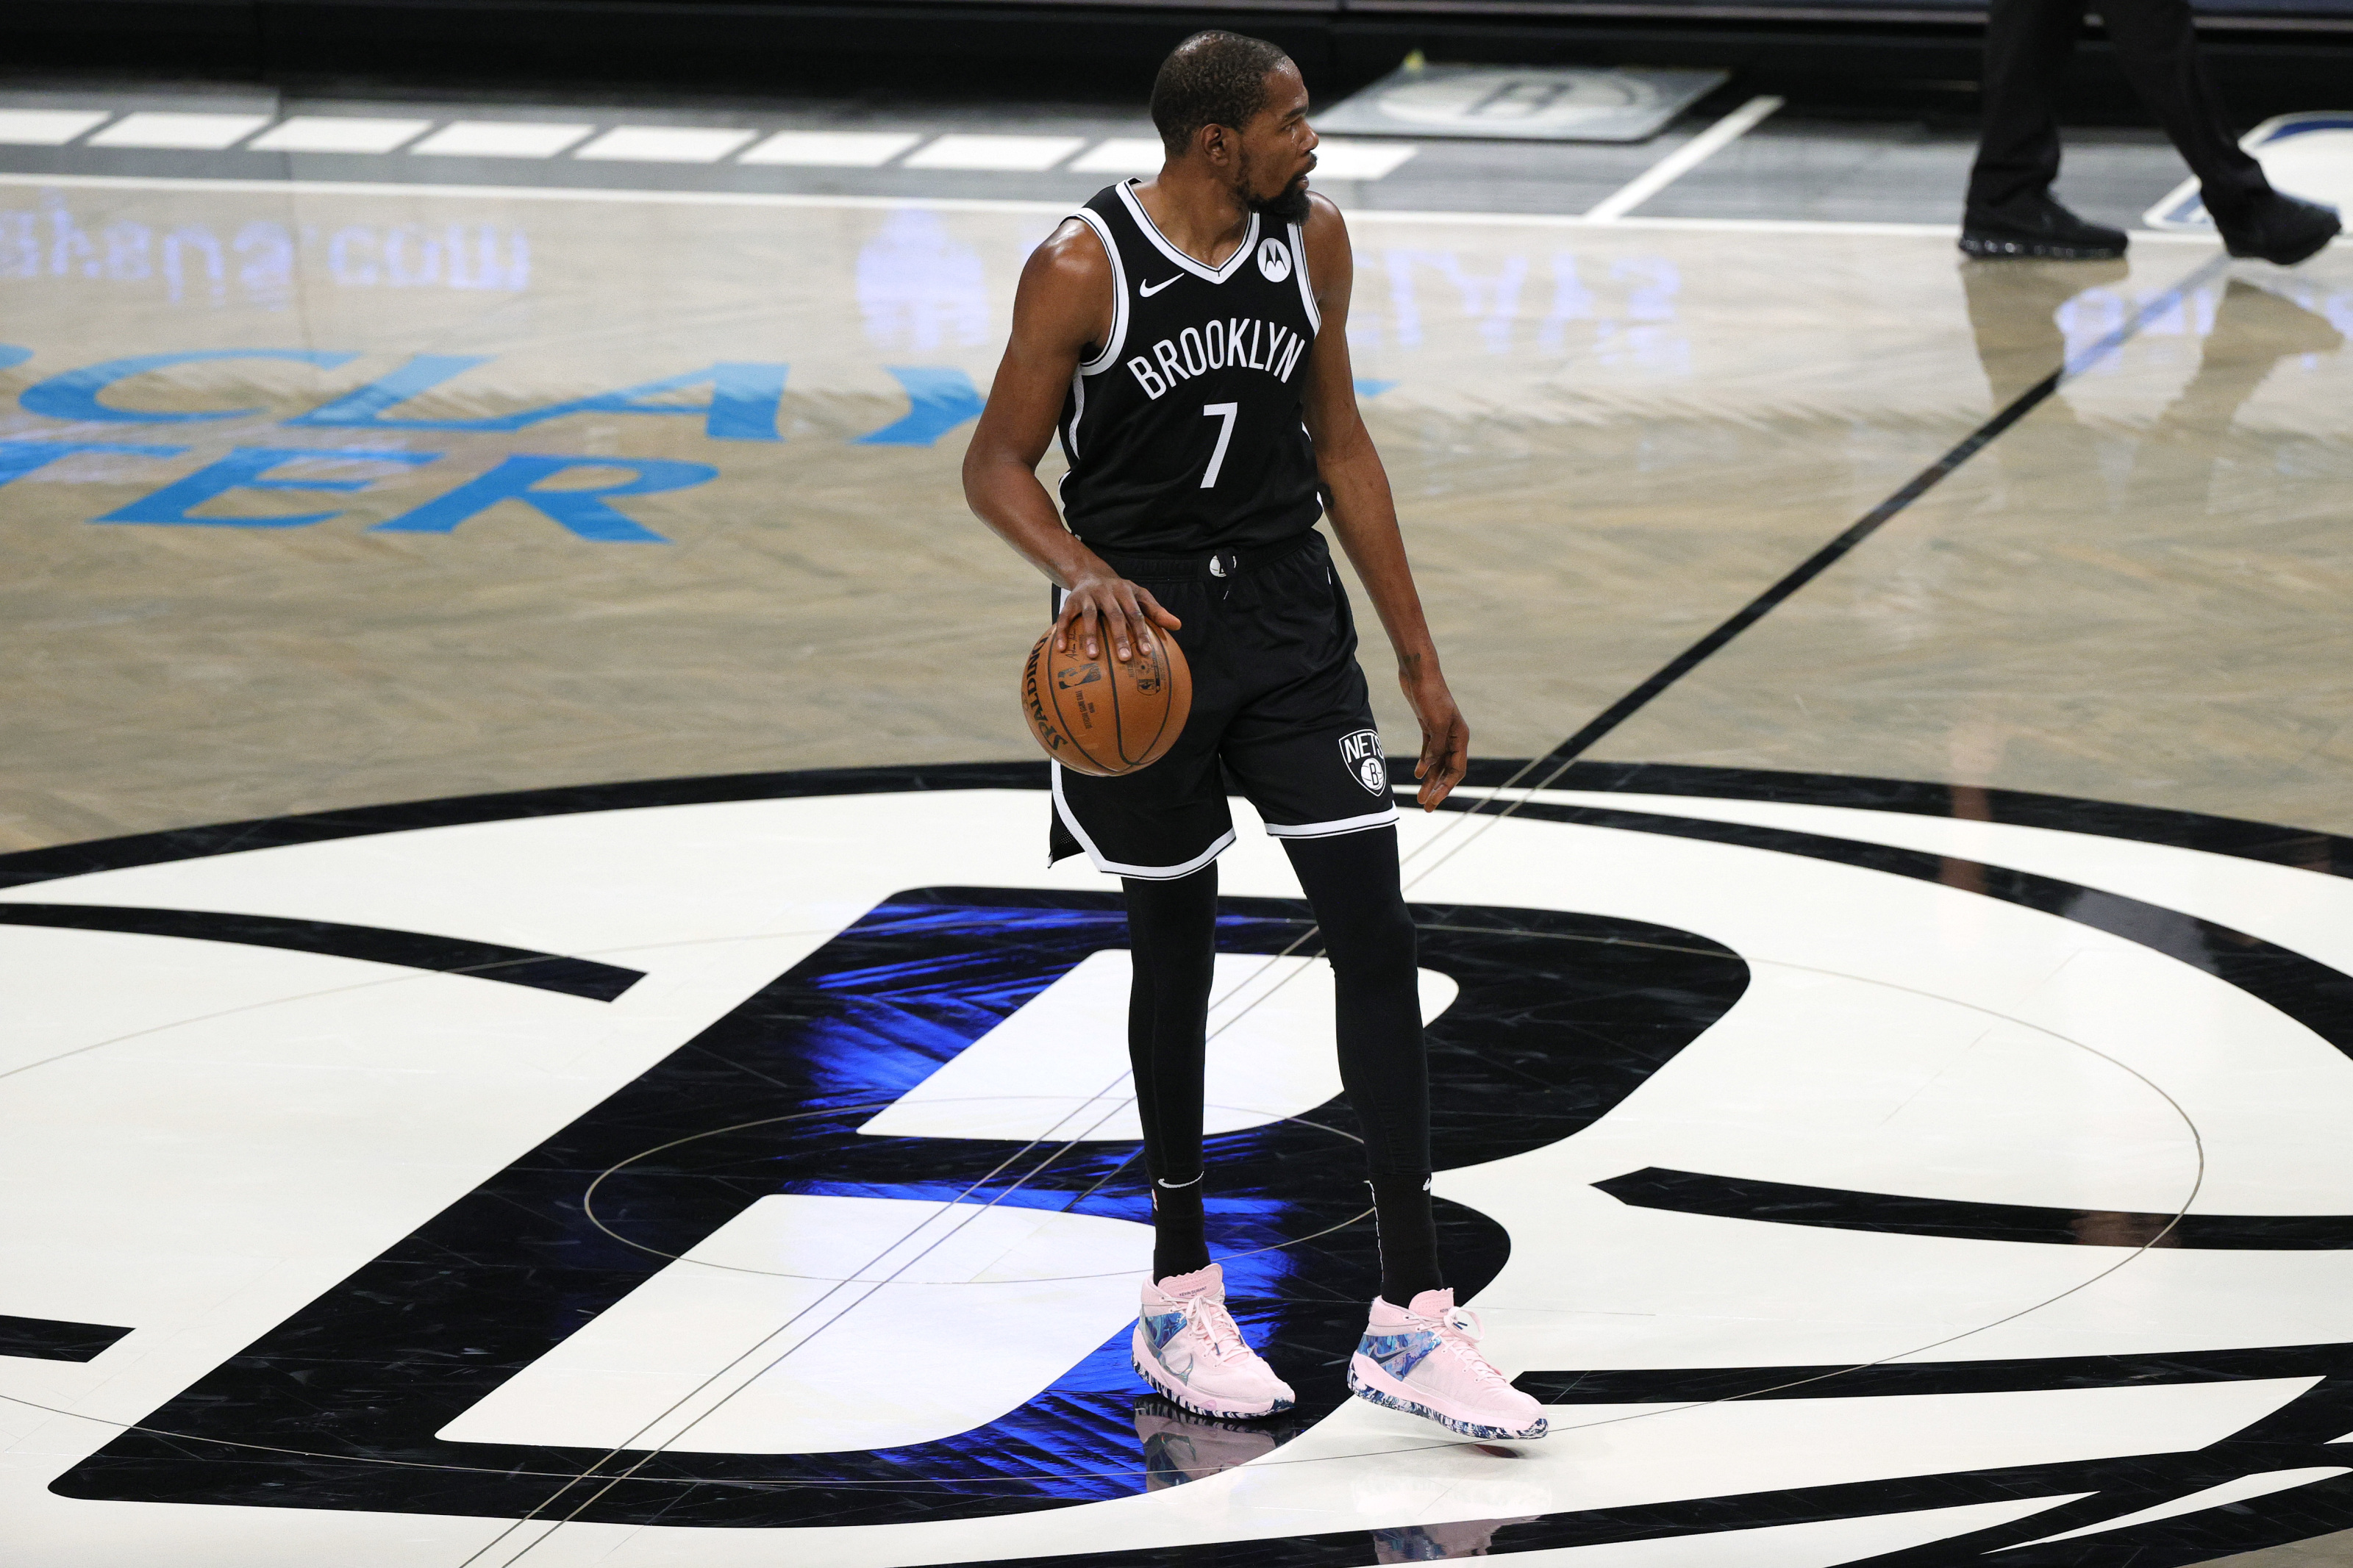 Brooklyn Nets - The first look